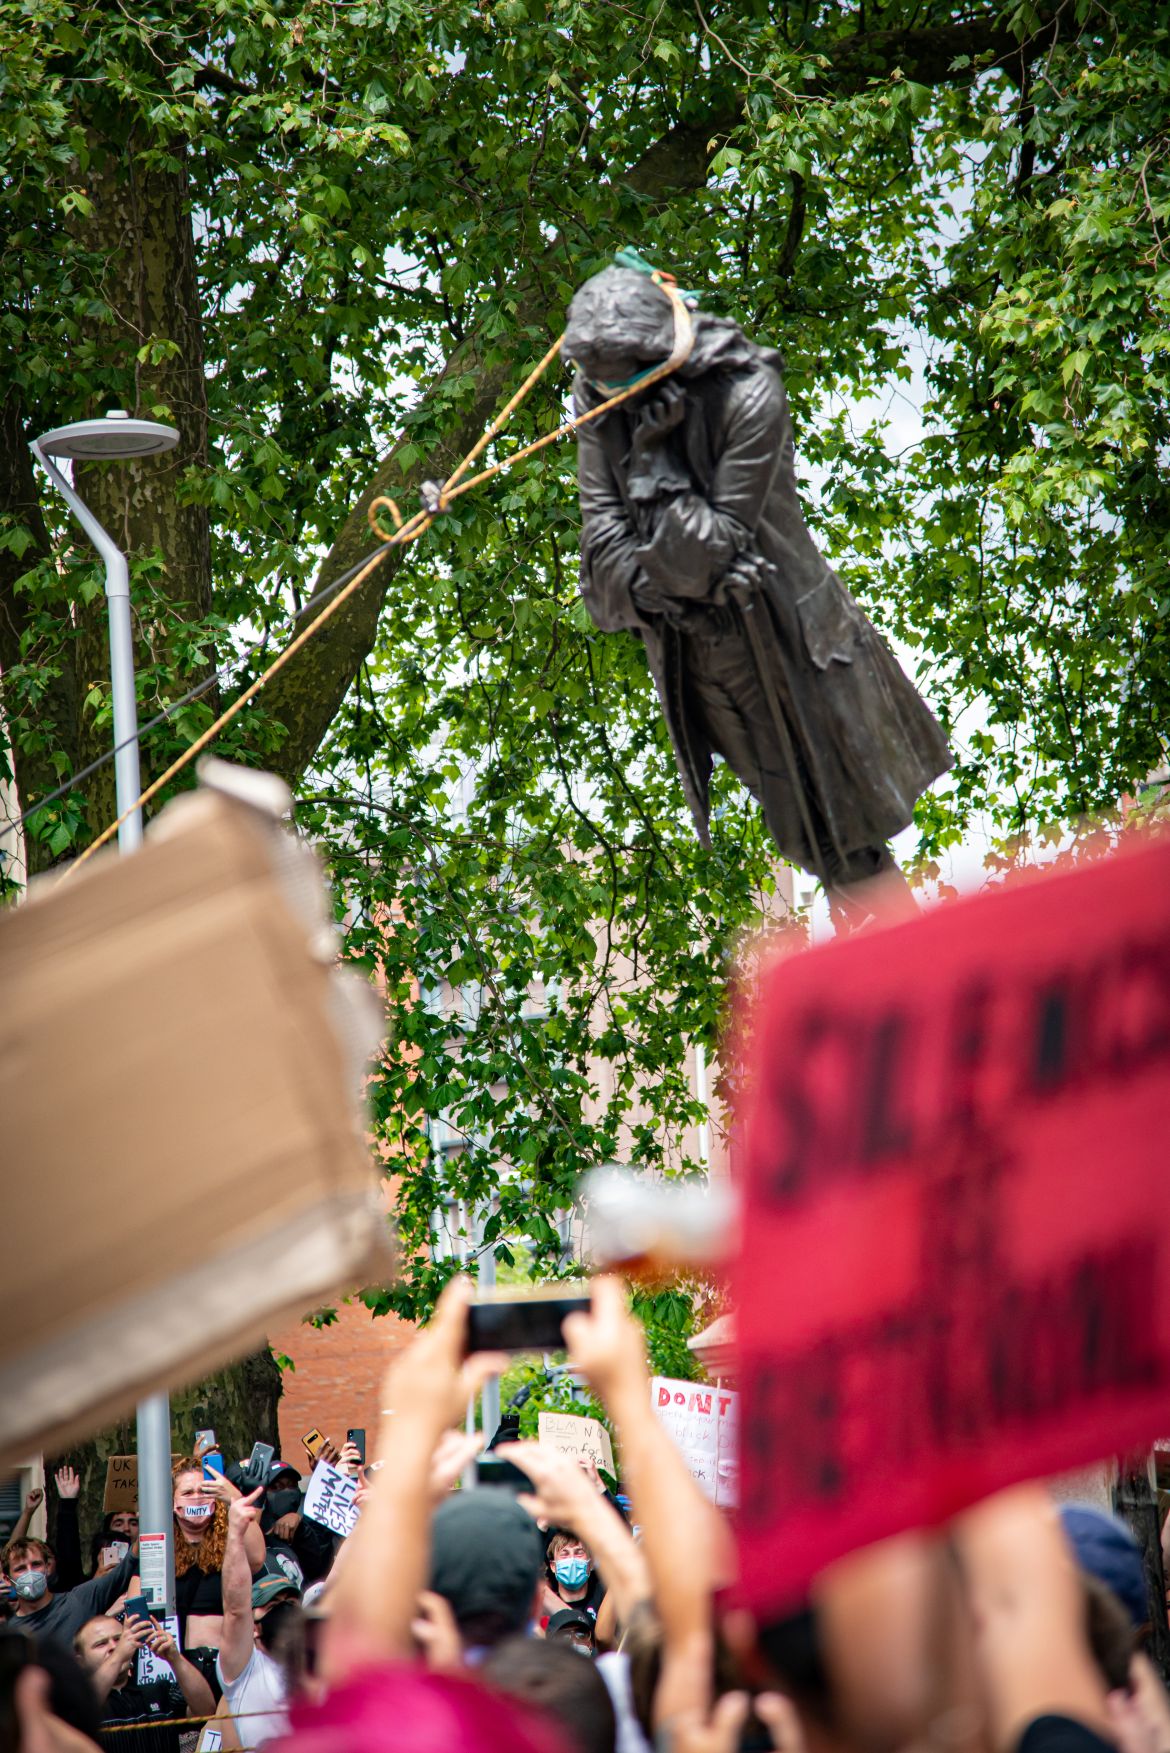 The statue of Edward Colston falls down as protesters pull it down, following the death of George Floyd who died in police custody in Minneapolis, in Bristol